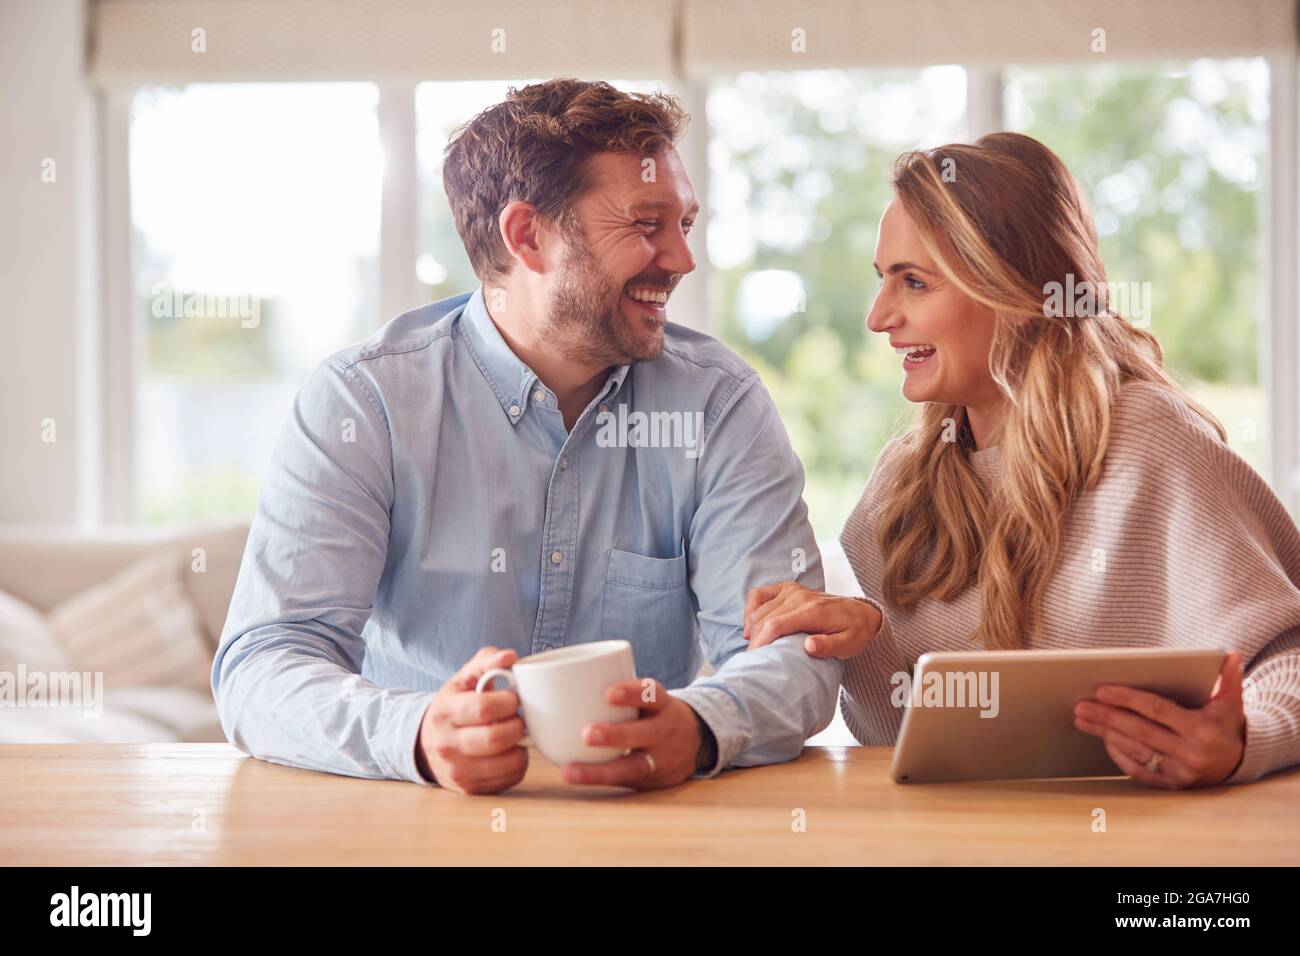 Couple At Home Buying Products Or Services Online Using Digital Tablet Stock Photo